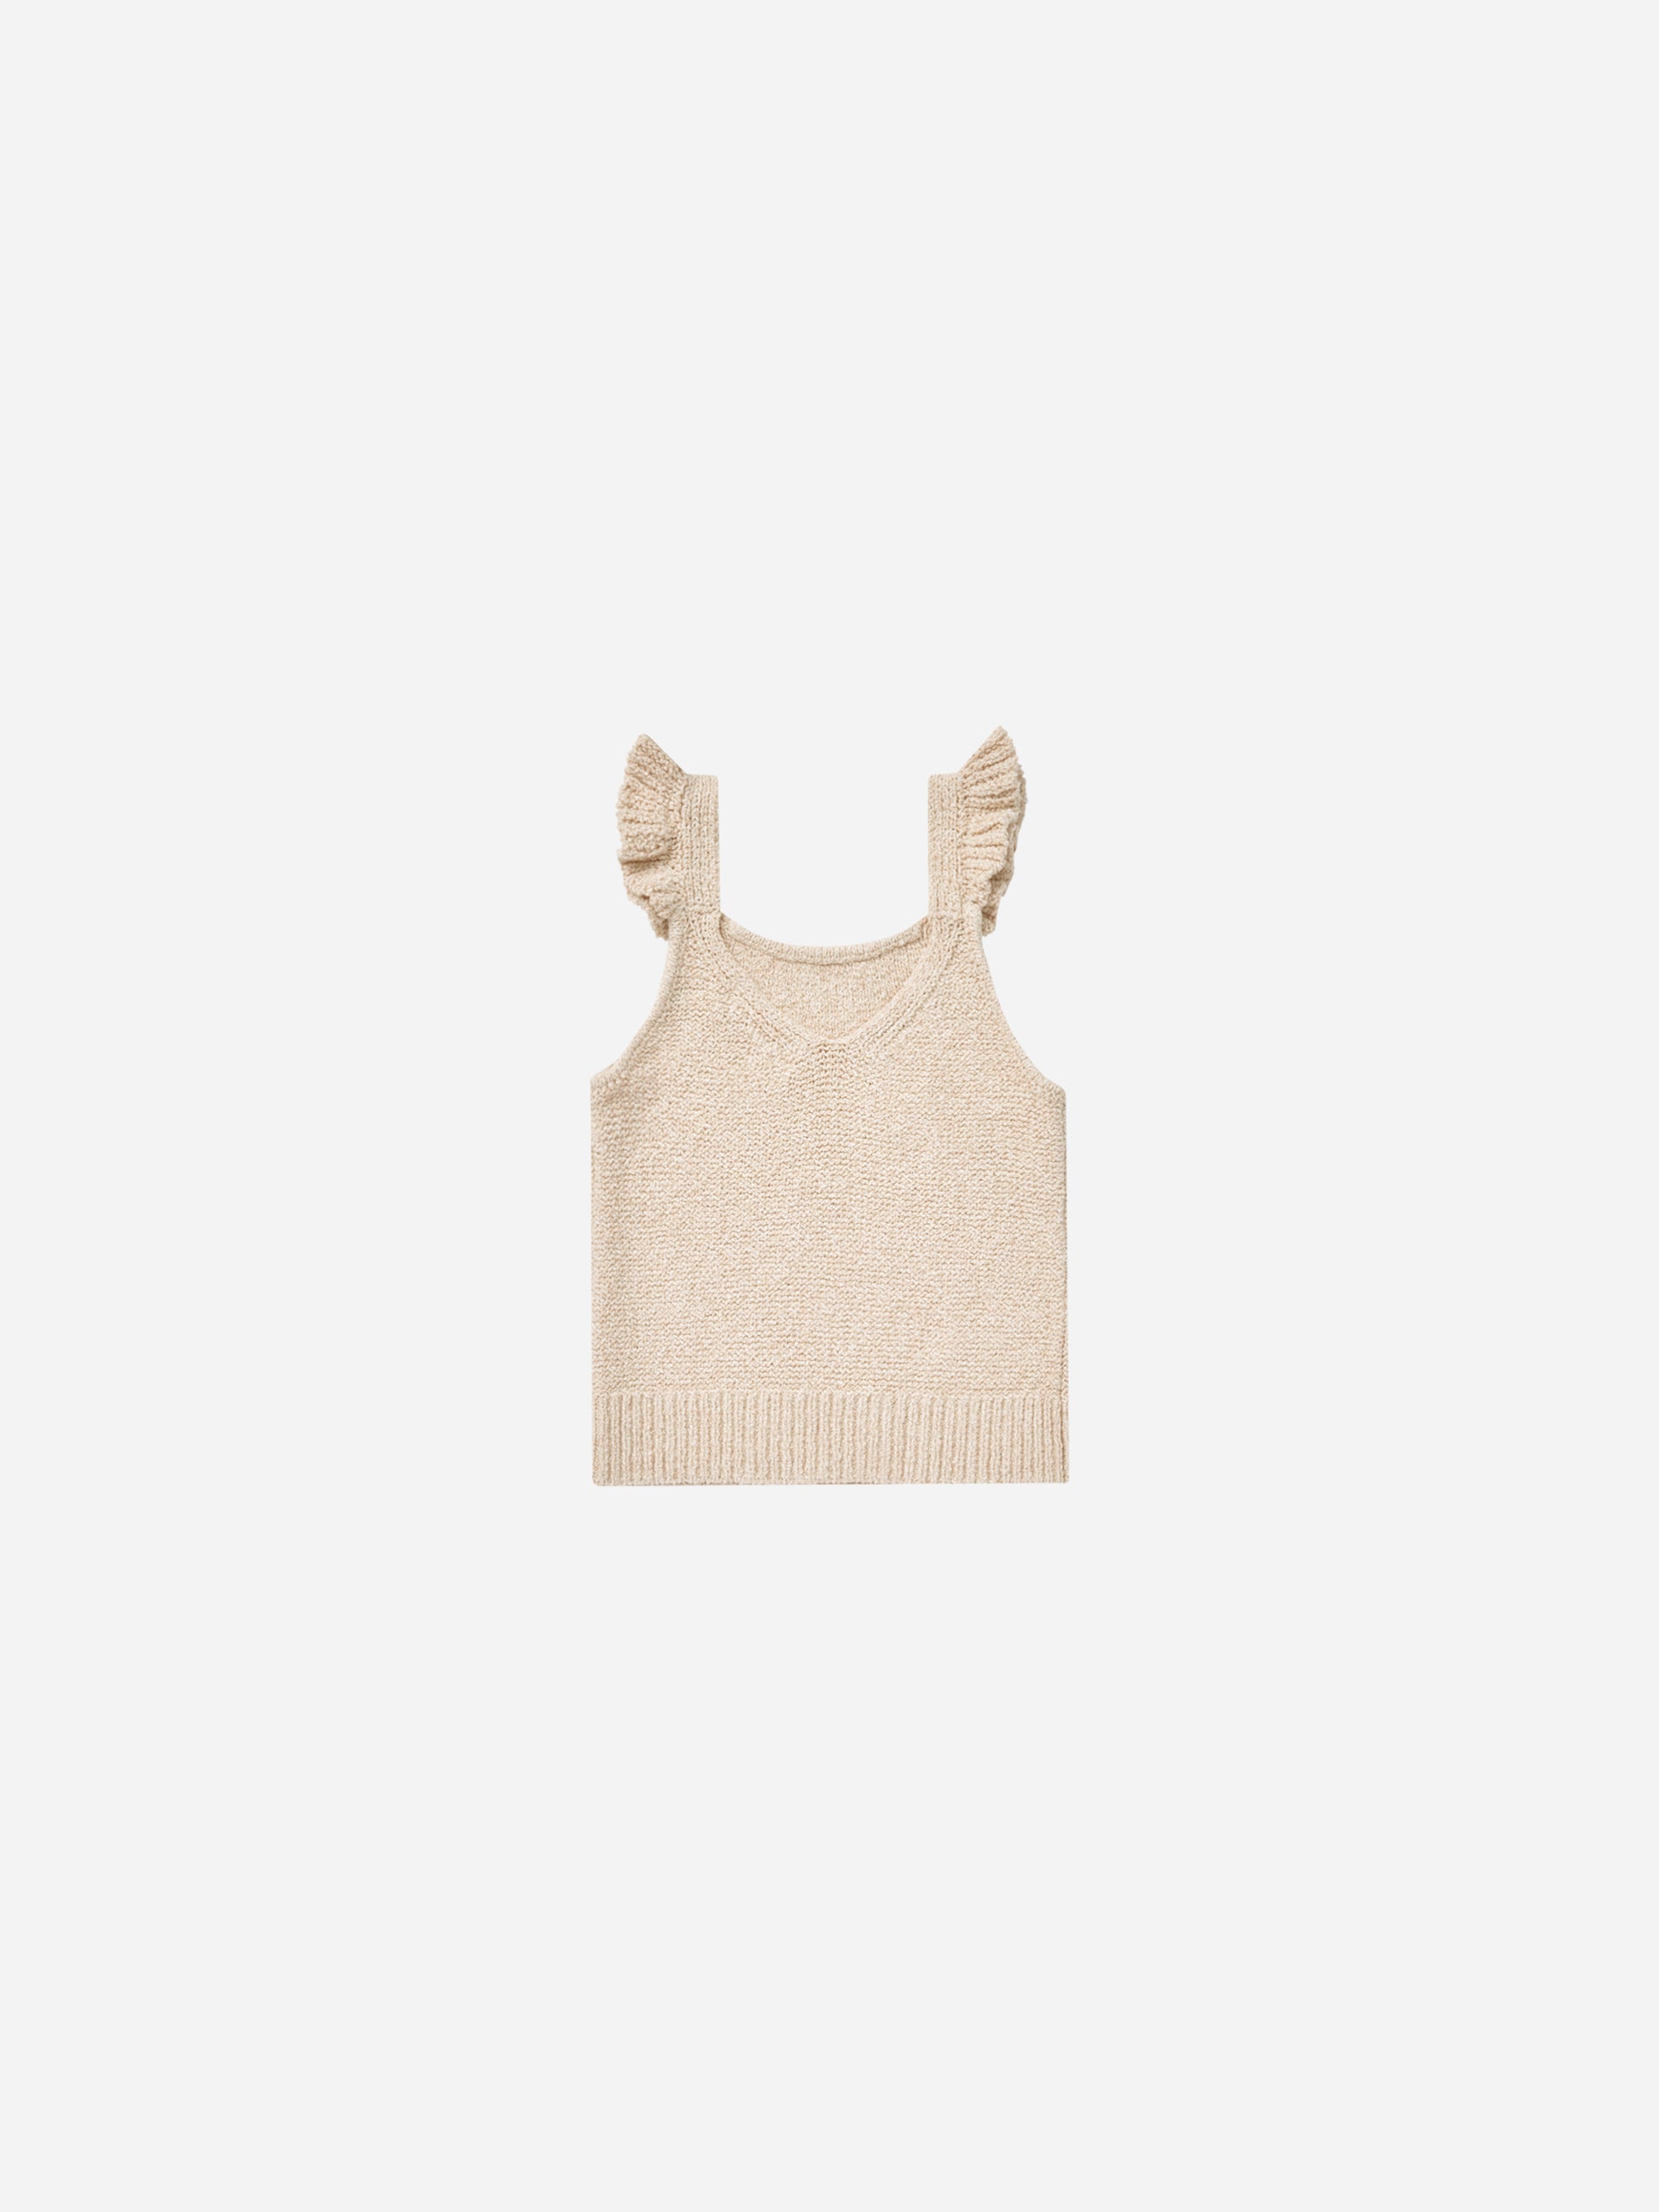 Knit Tank || Heathered Oat - Rylee + Cru | Kids Clothes | Trendy Baby Clothes | Modern Infant Outfits |